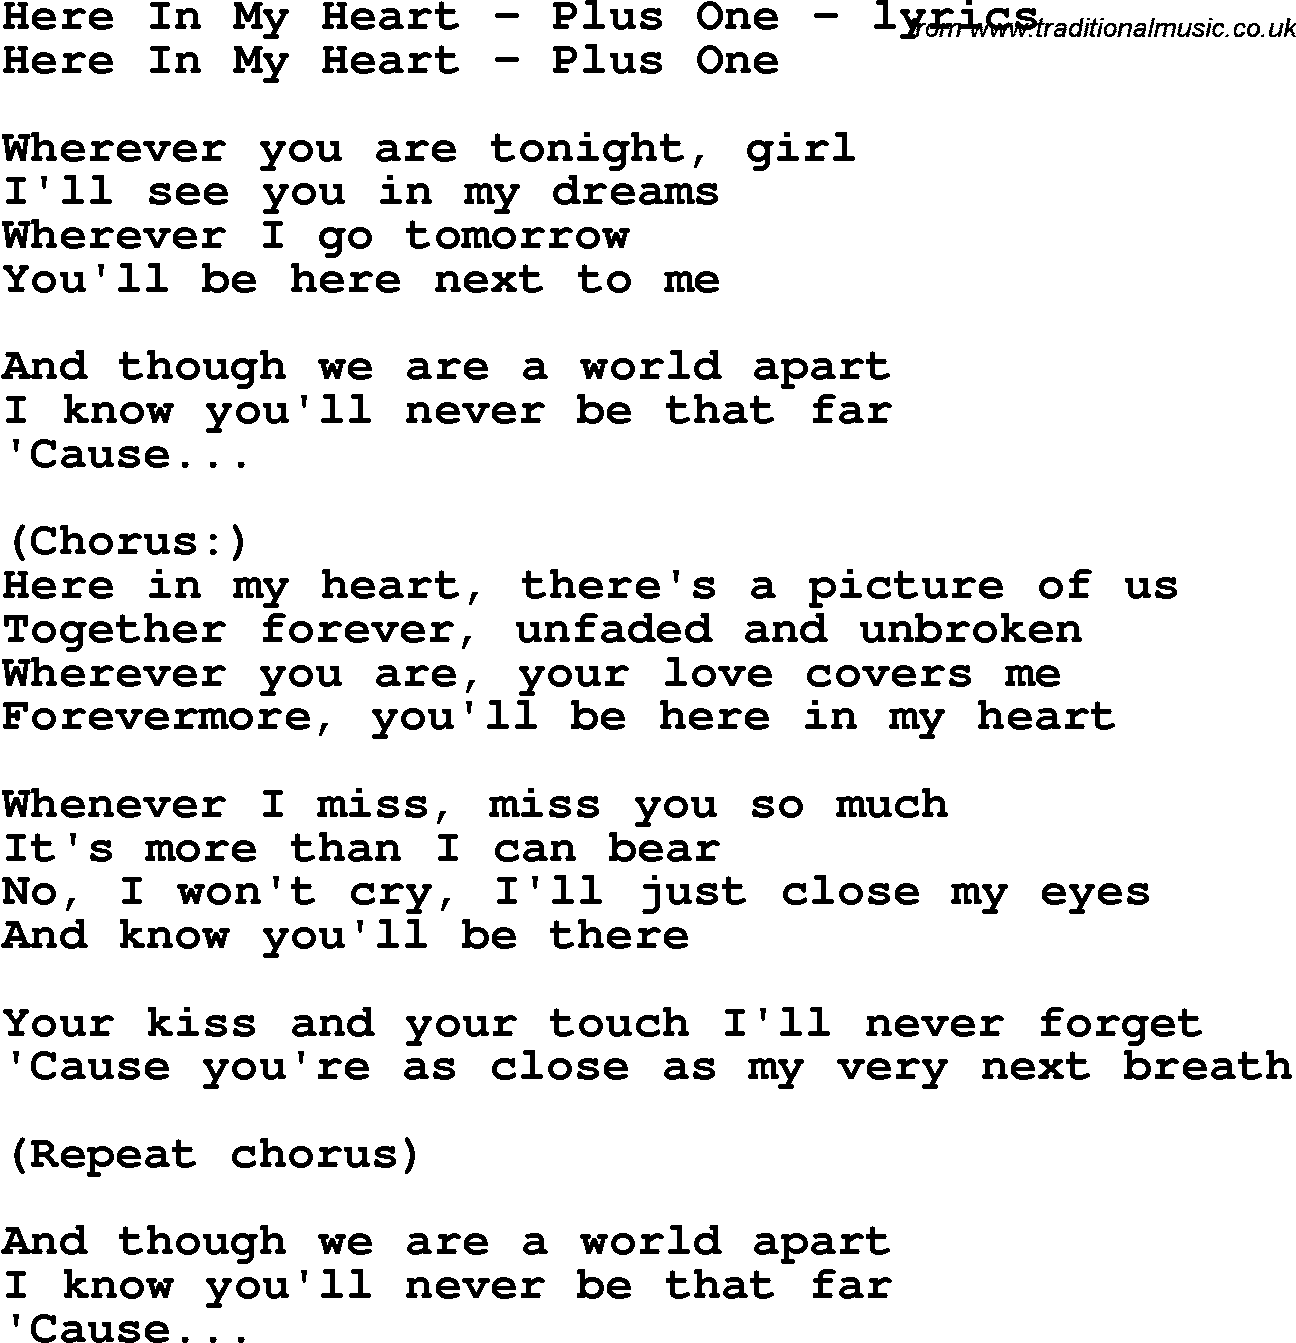 Love Song Lyrics for: Here In My Heart - Plus One